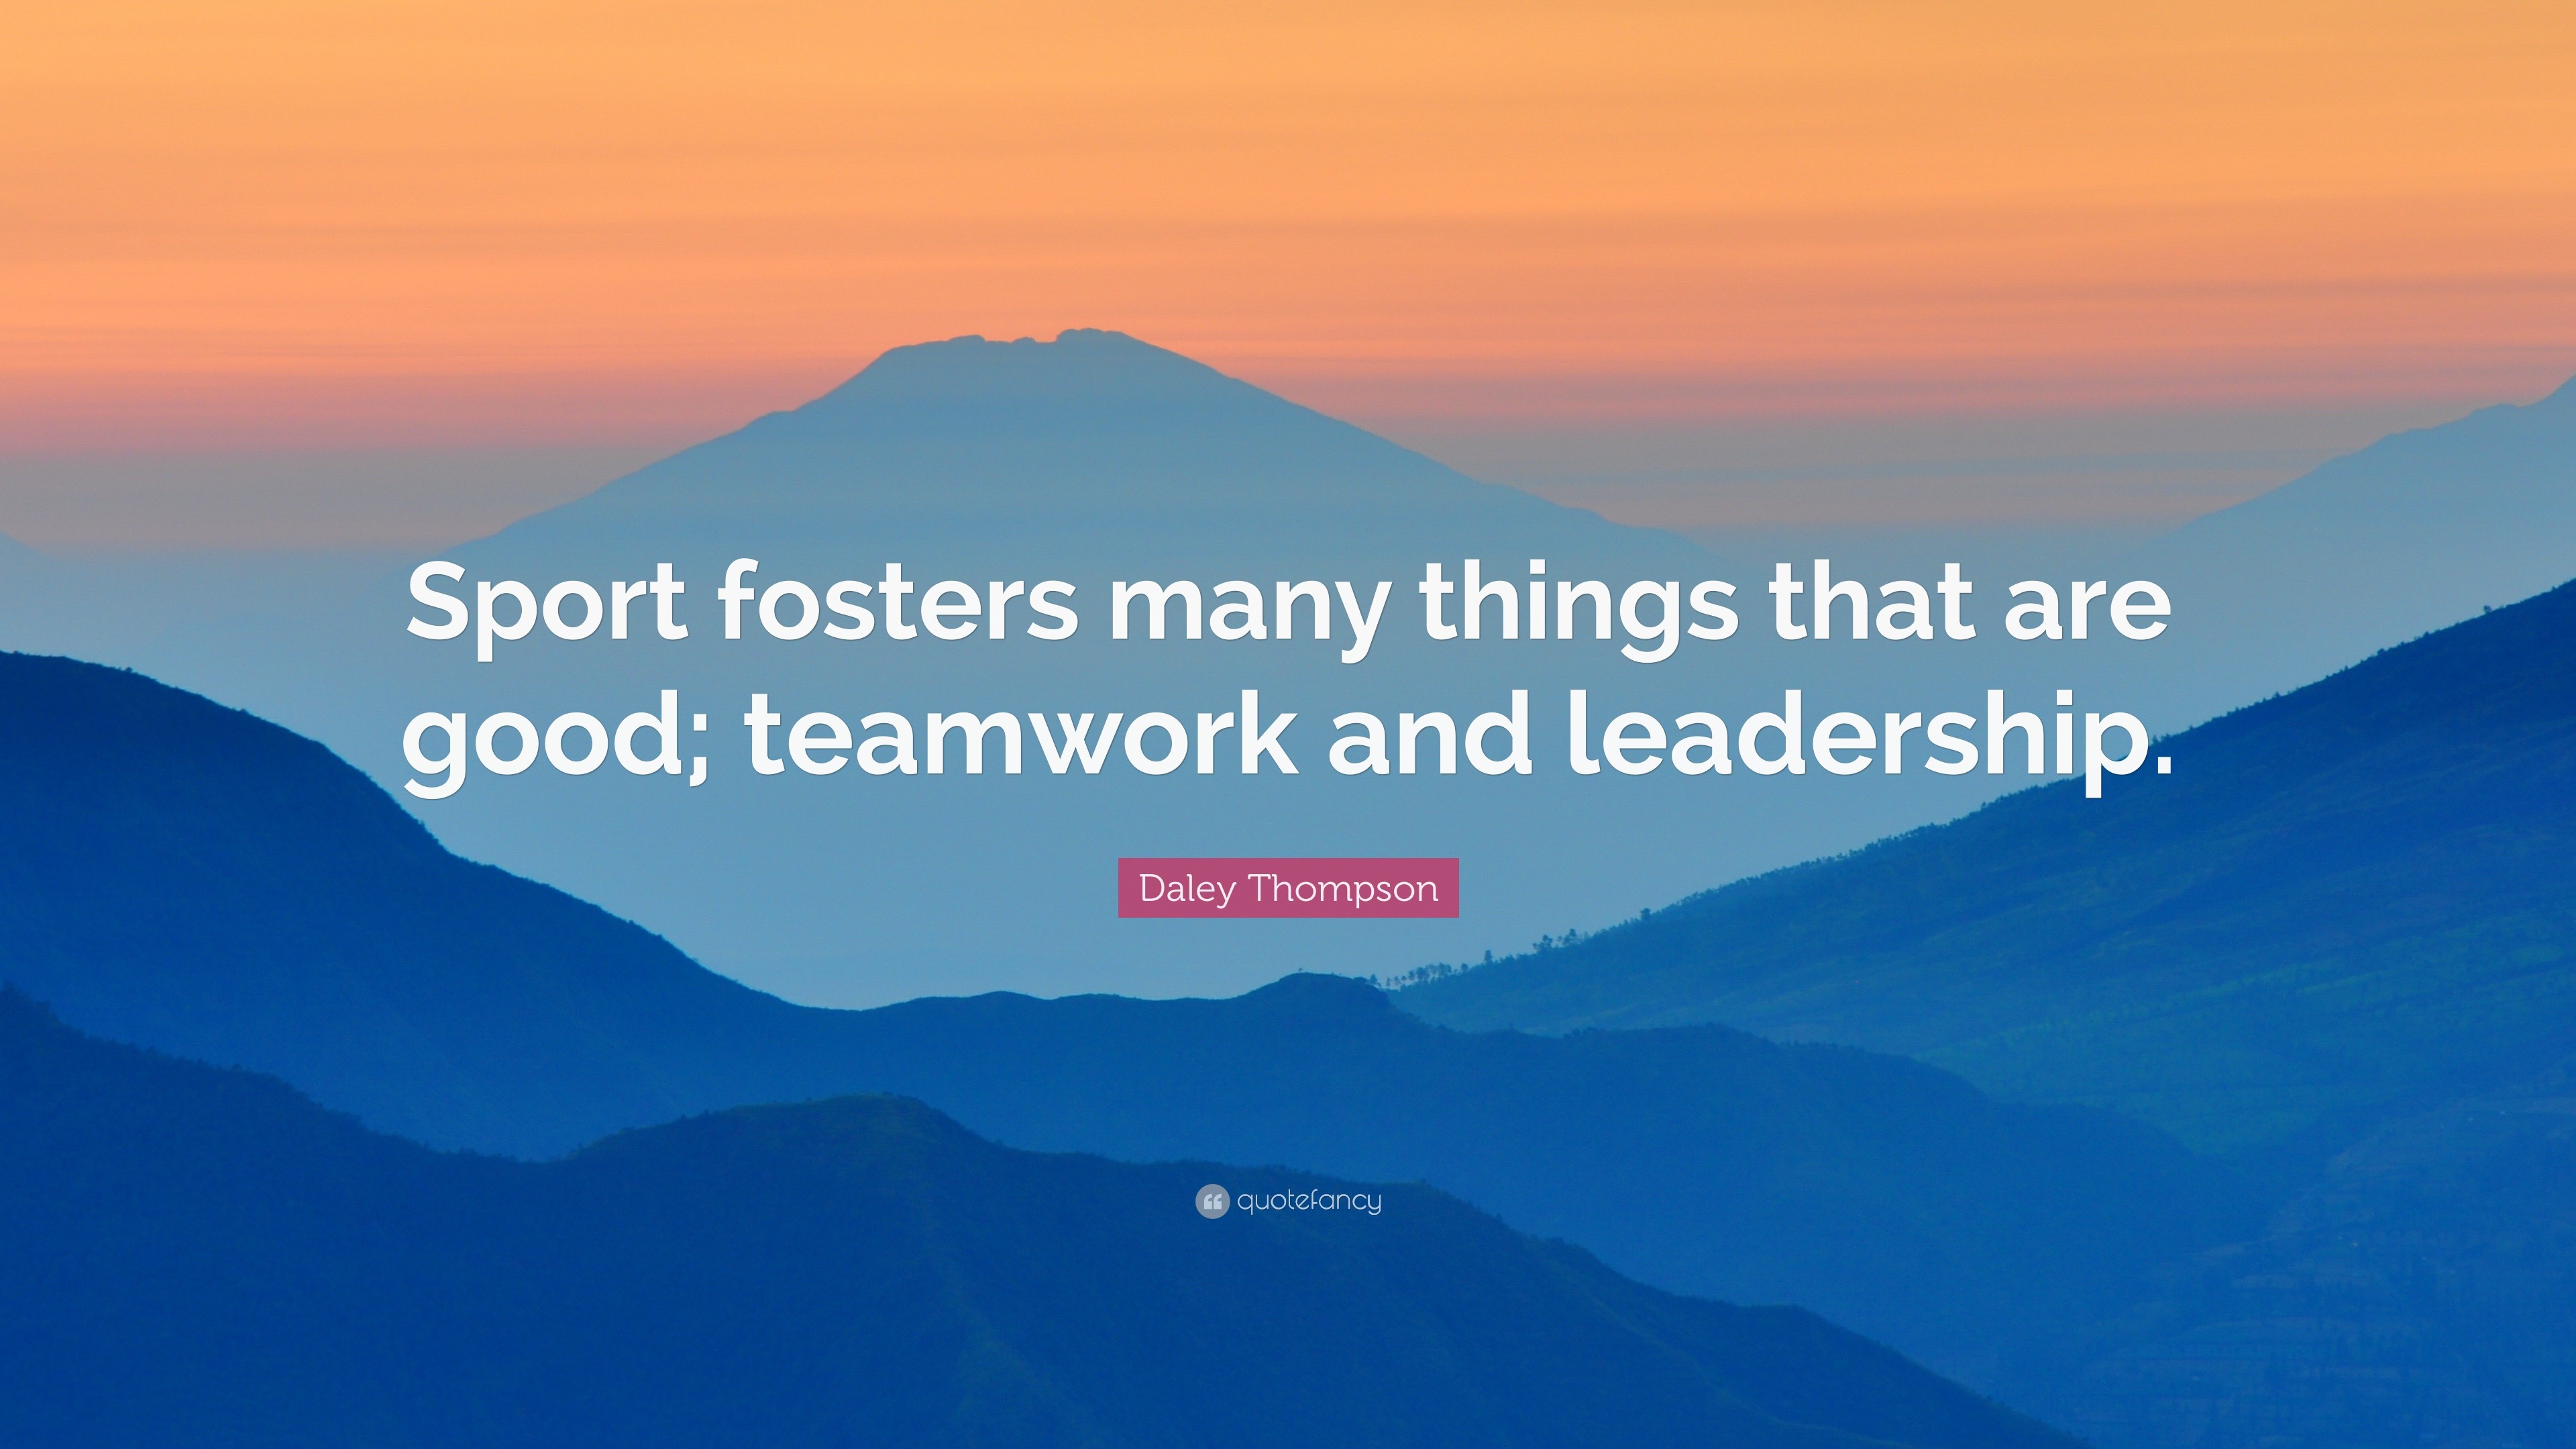 Daley Thompson Quote: “Sport fosters many things that are good ...